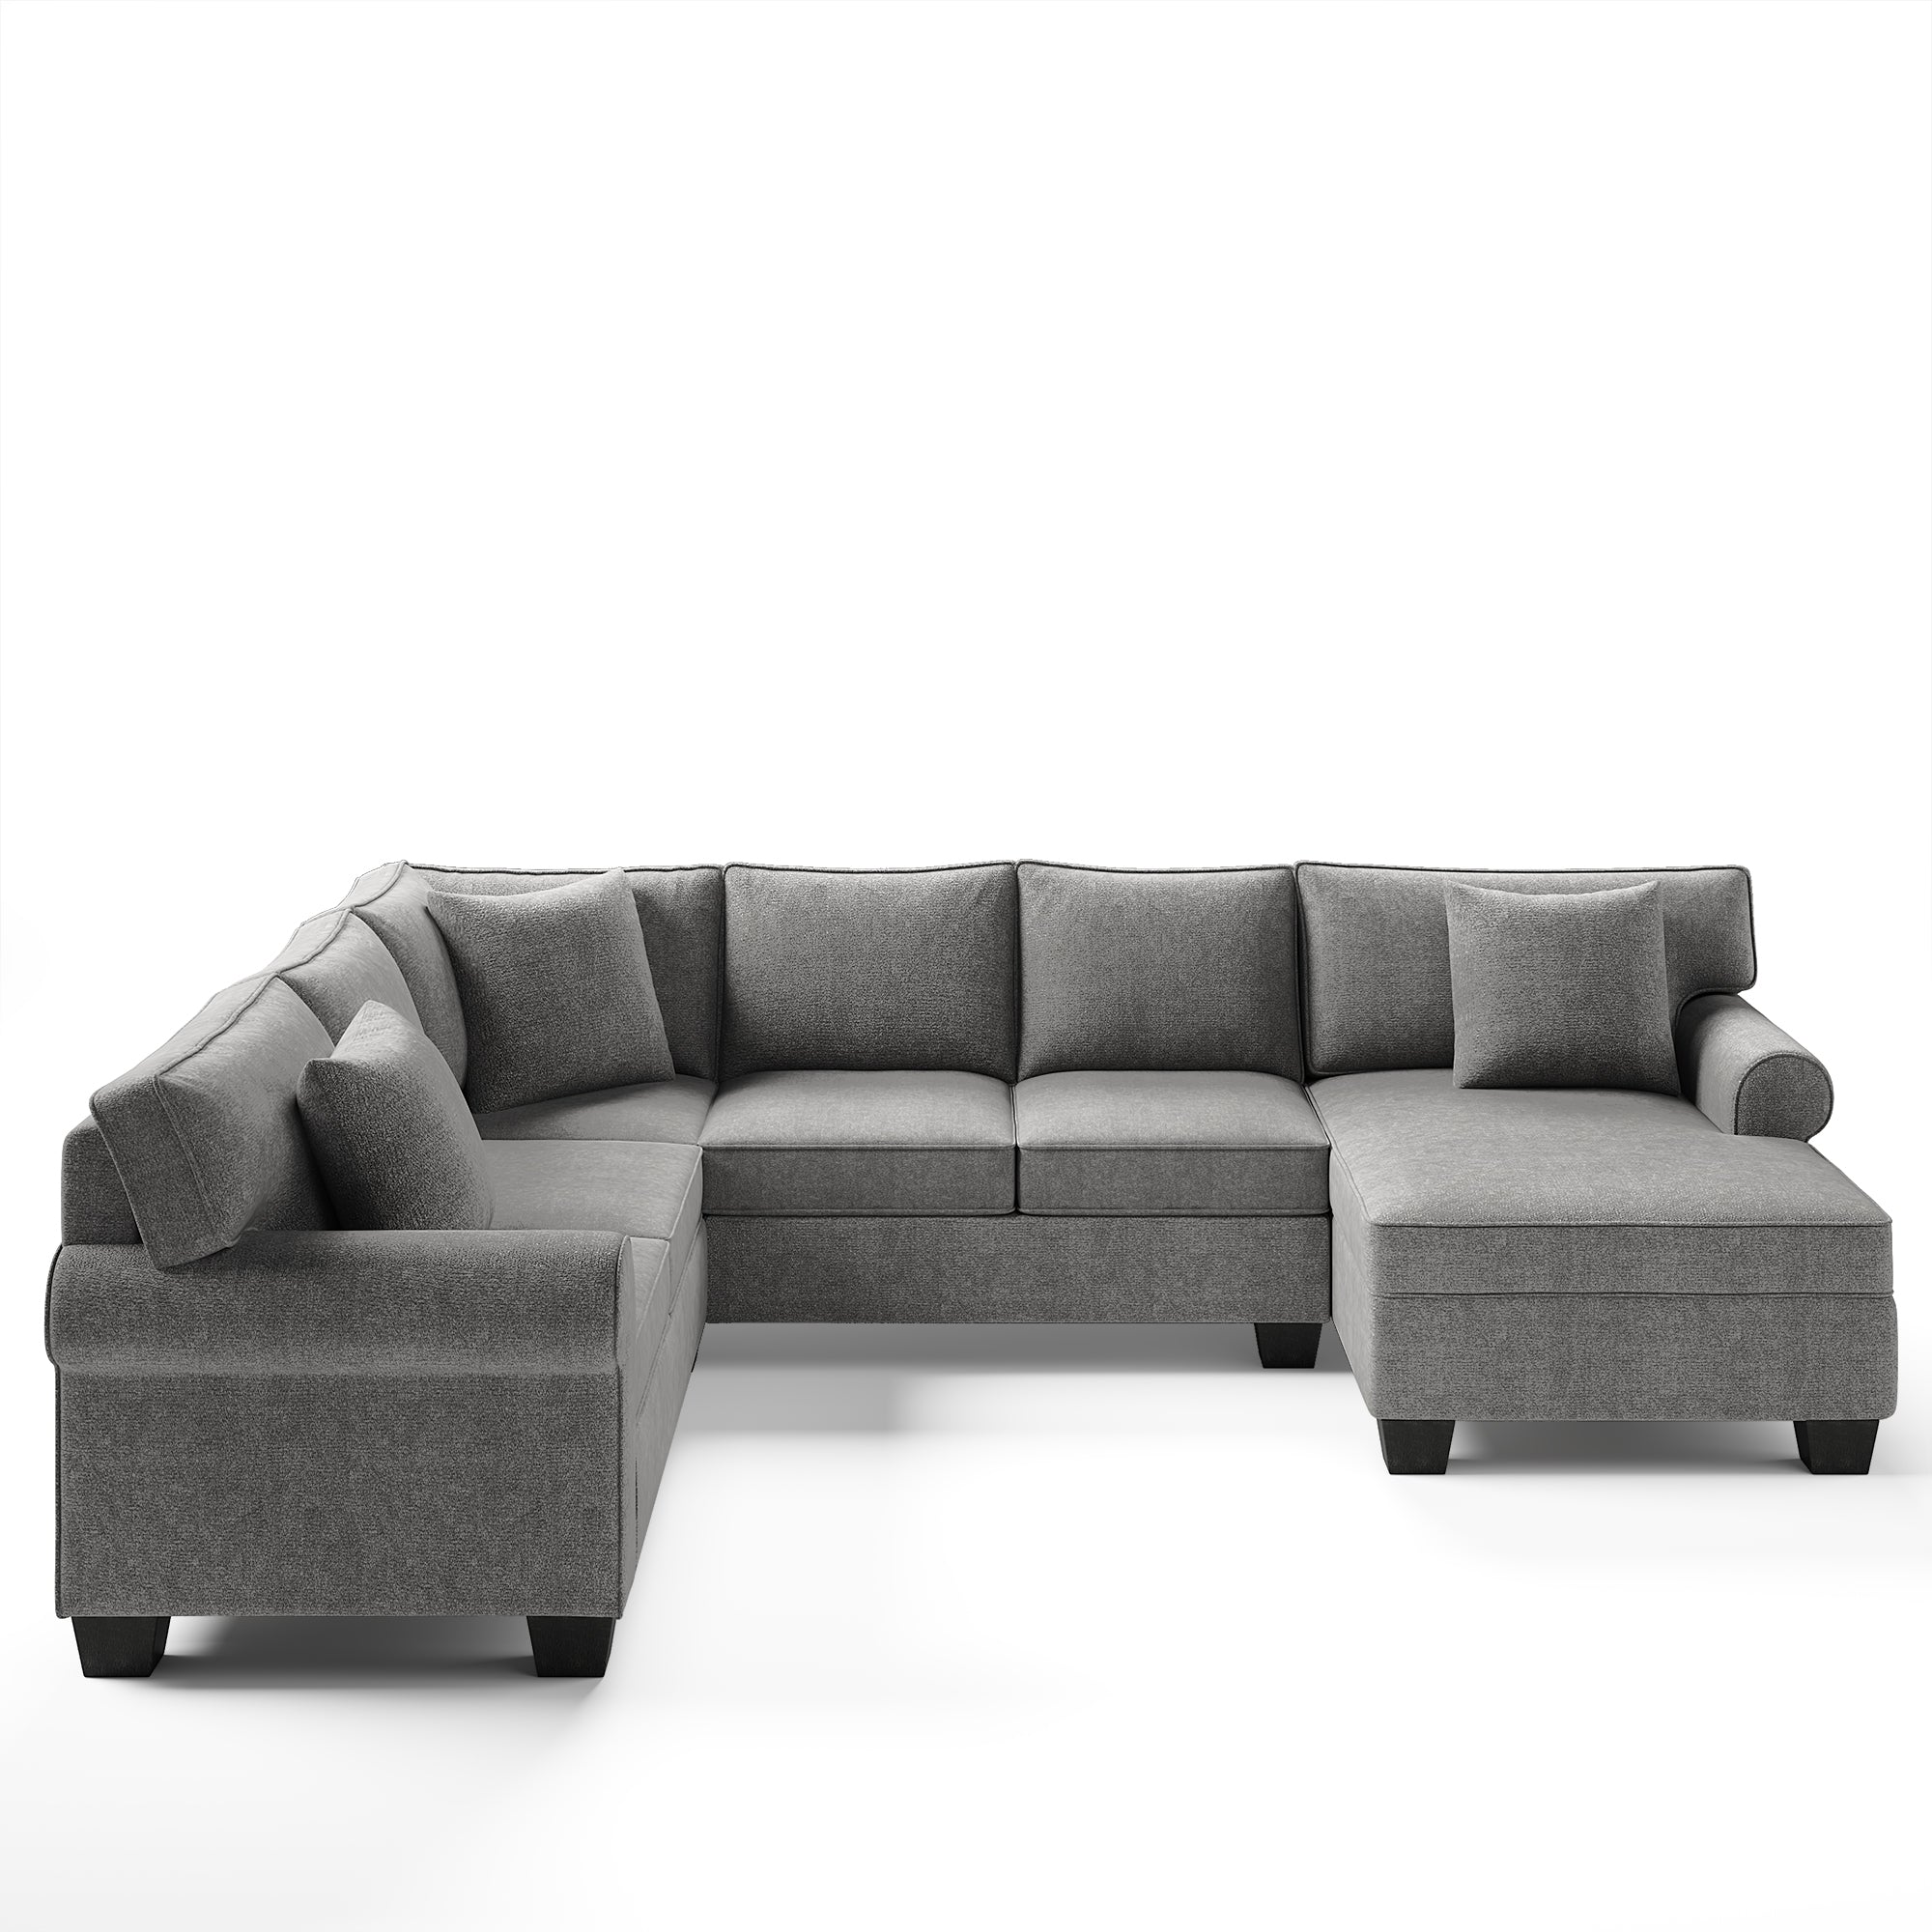 113*87.8" 3 pcs Chenille Sectional Sofa Upholstered Rolled Arm Classic Chesterfield Sectional Sofa 3 Pillows Included